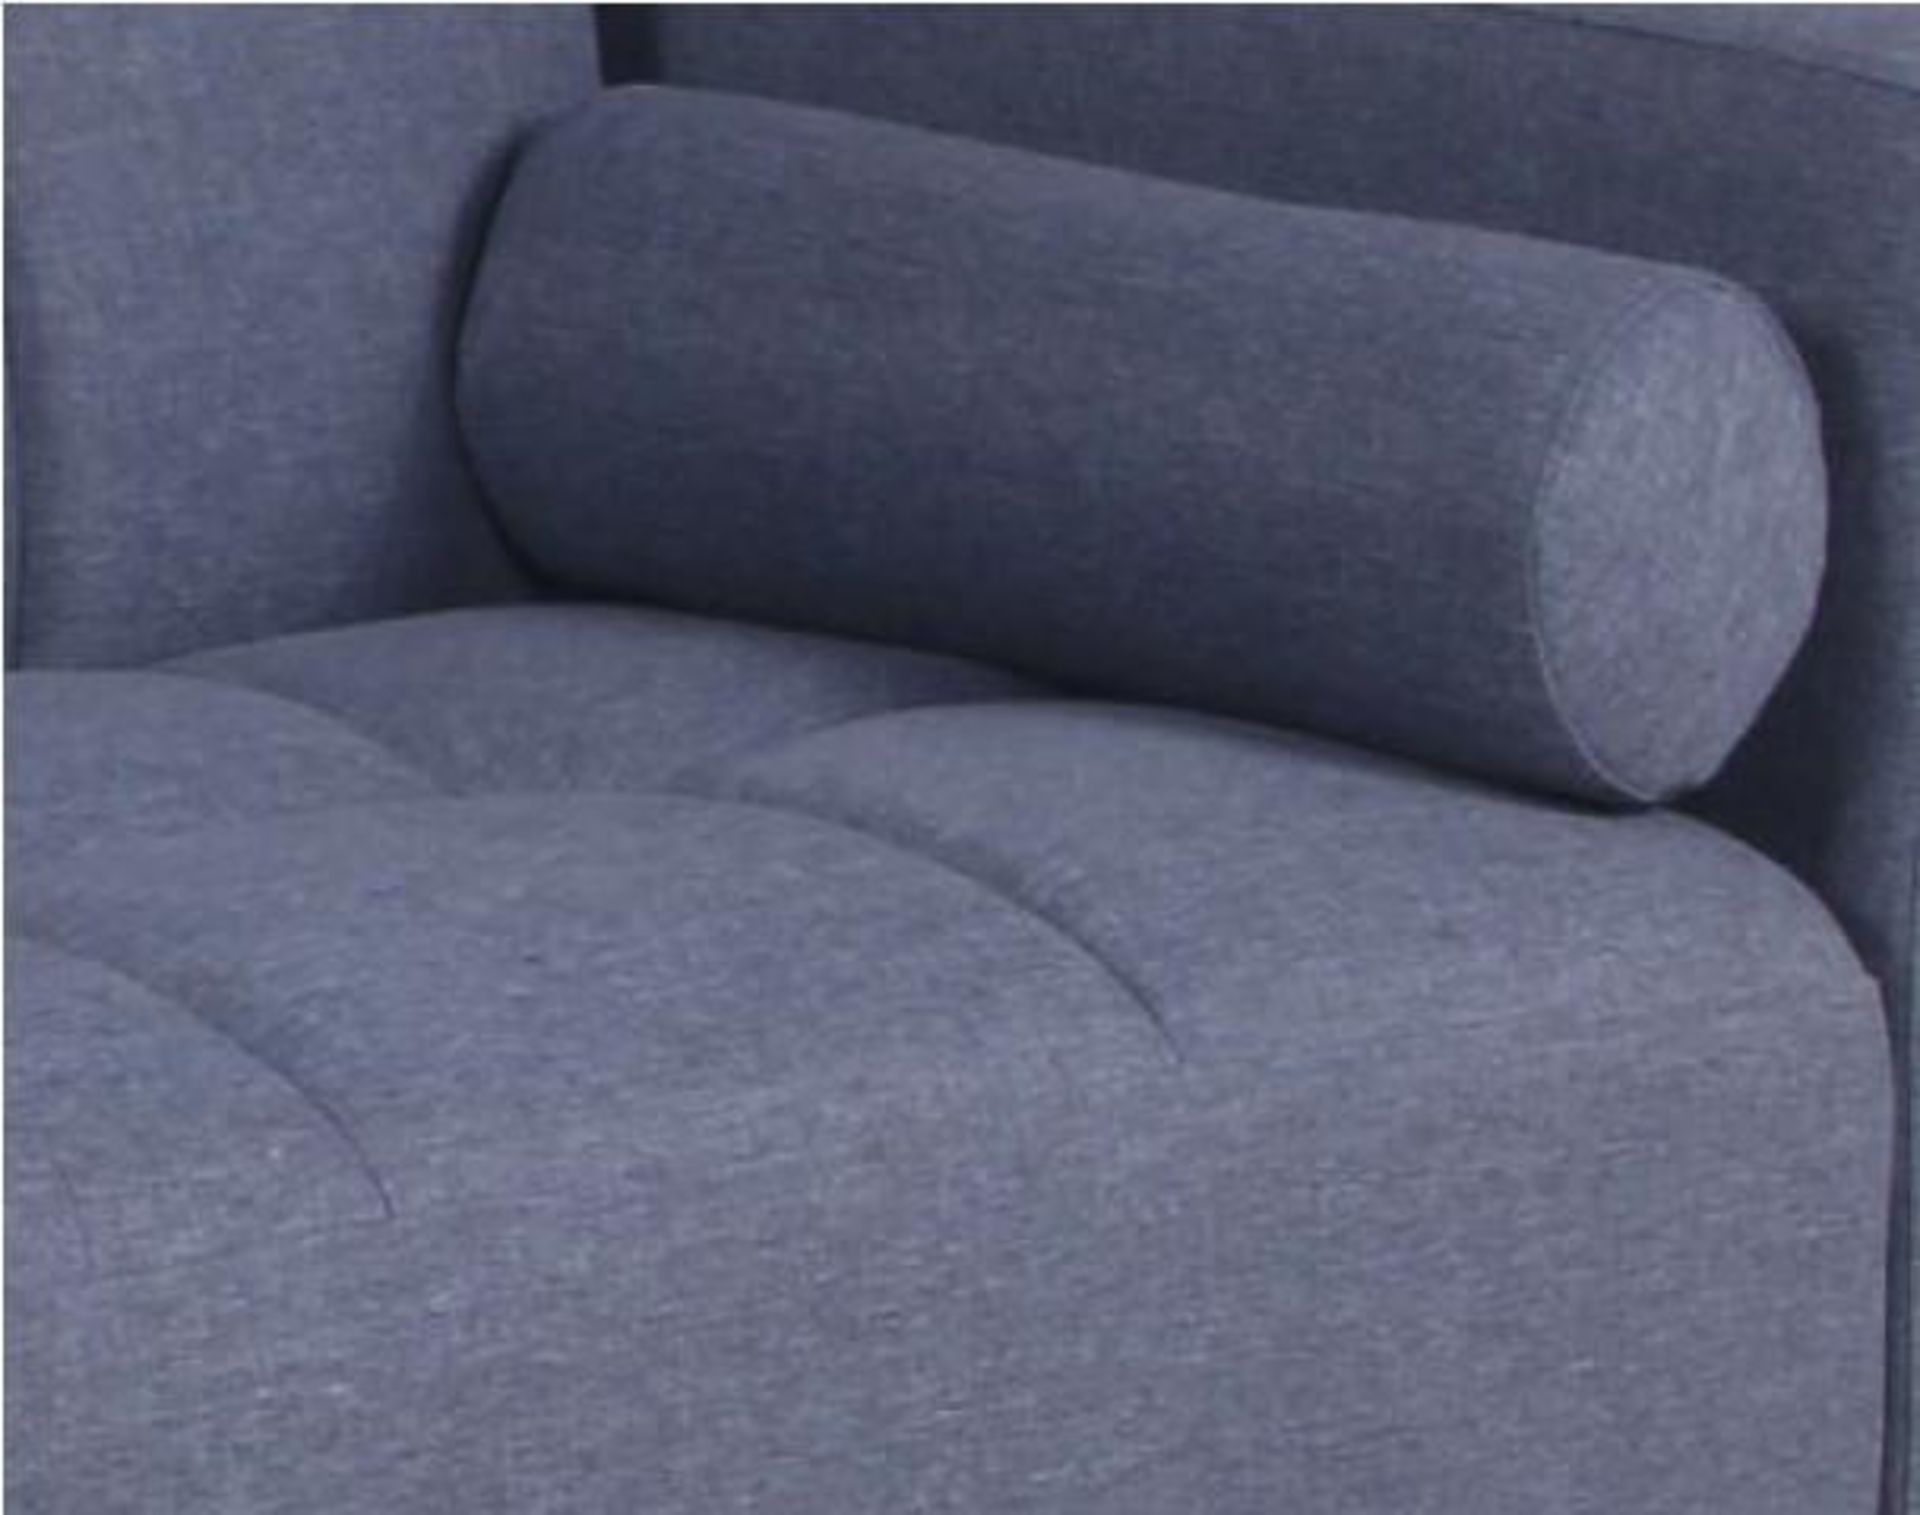 *NO VAT ON HAMMER* Brand new Boxed 2 Seater Clic Clac USB Sofa Bed - Image 9 of 10